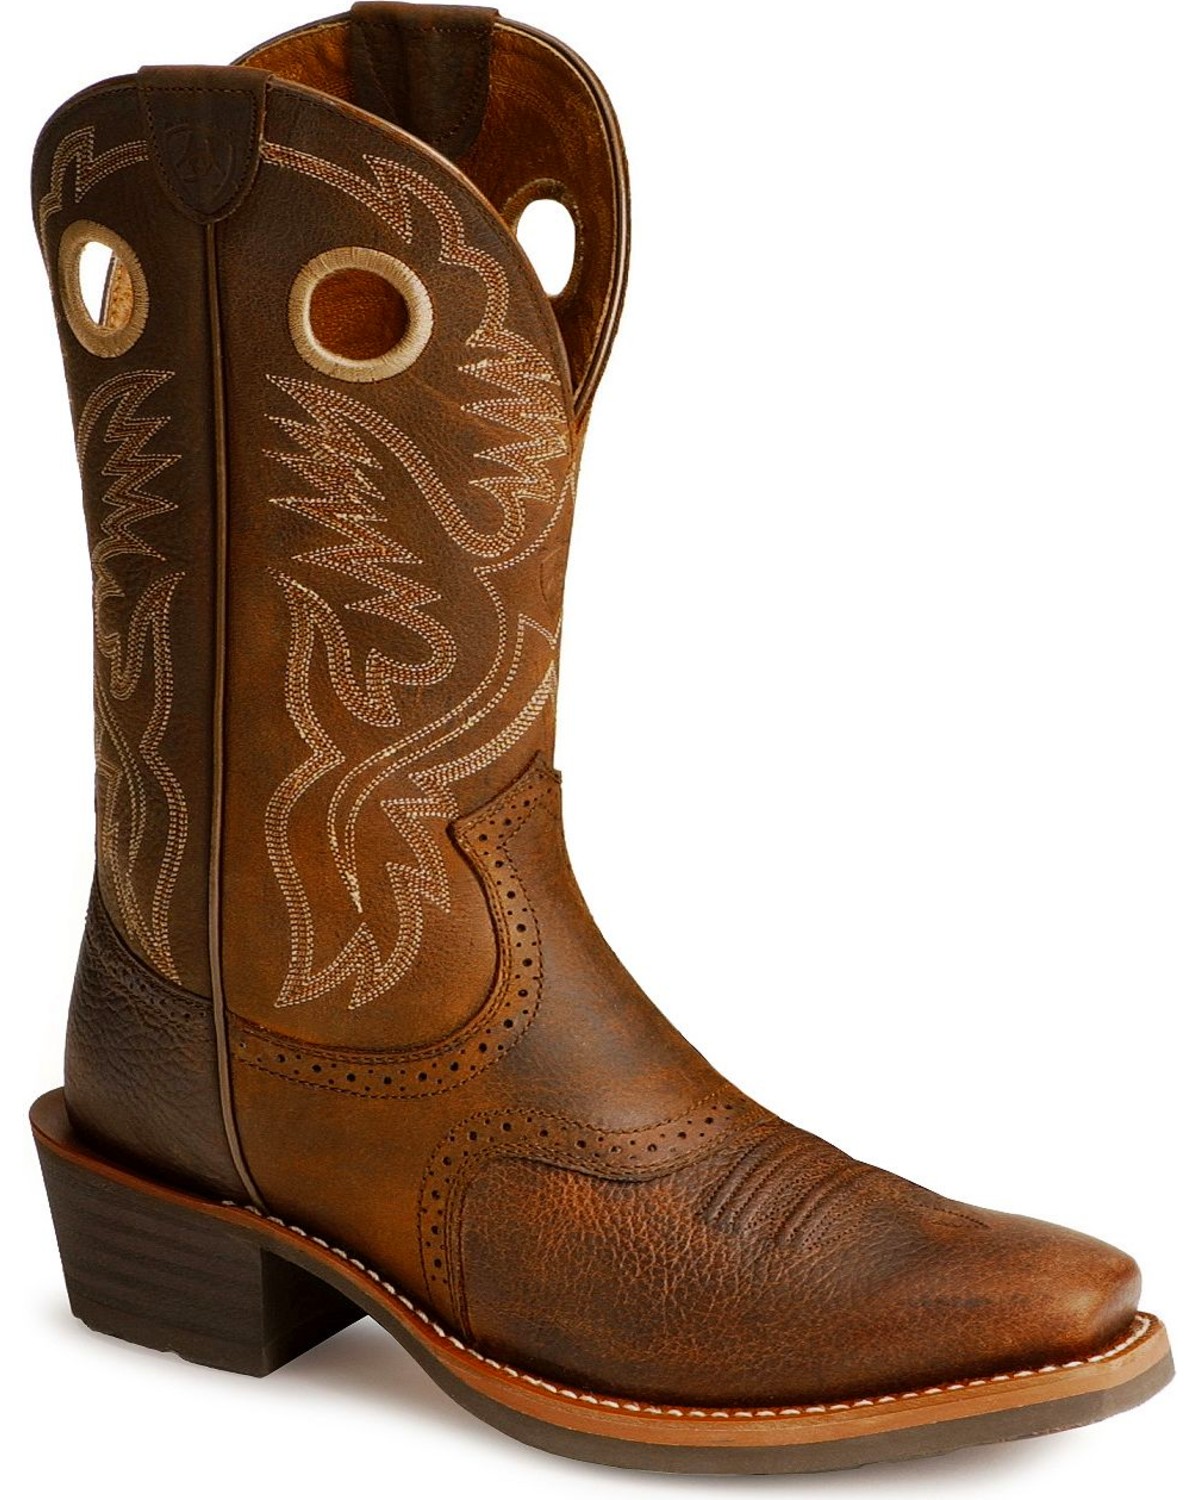 Heritage Roughstock Western Boots 